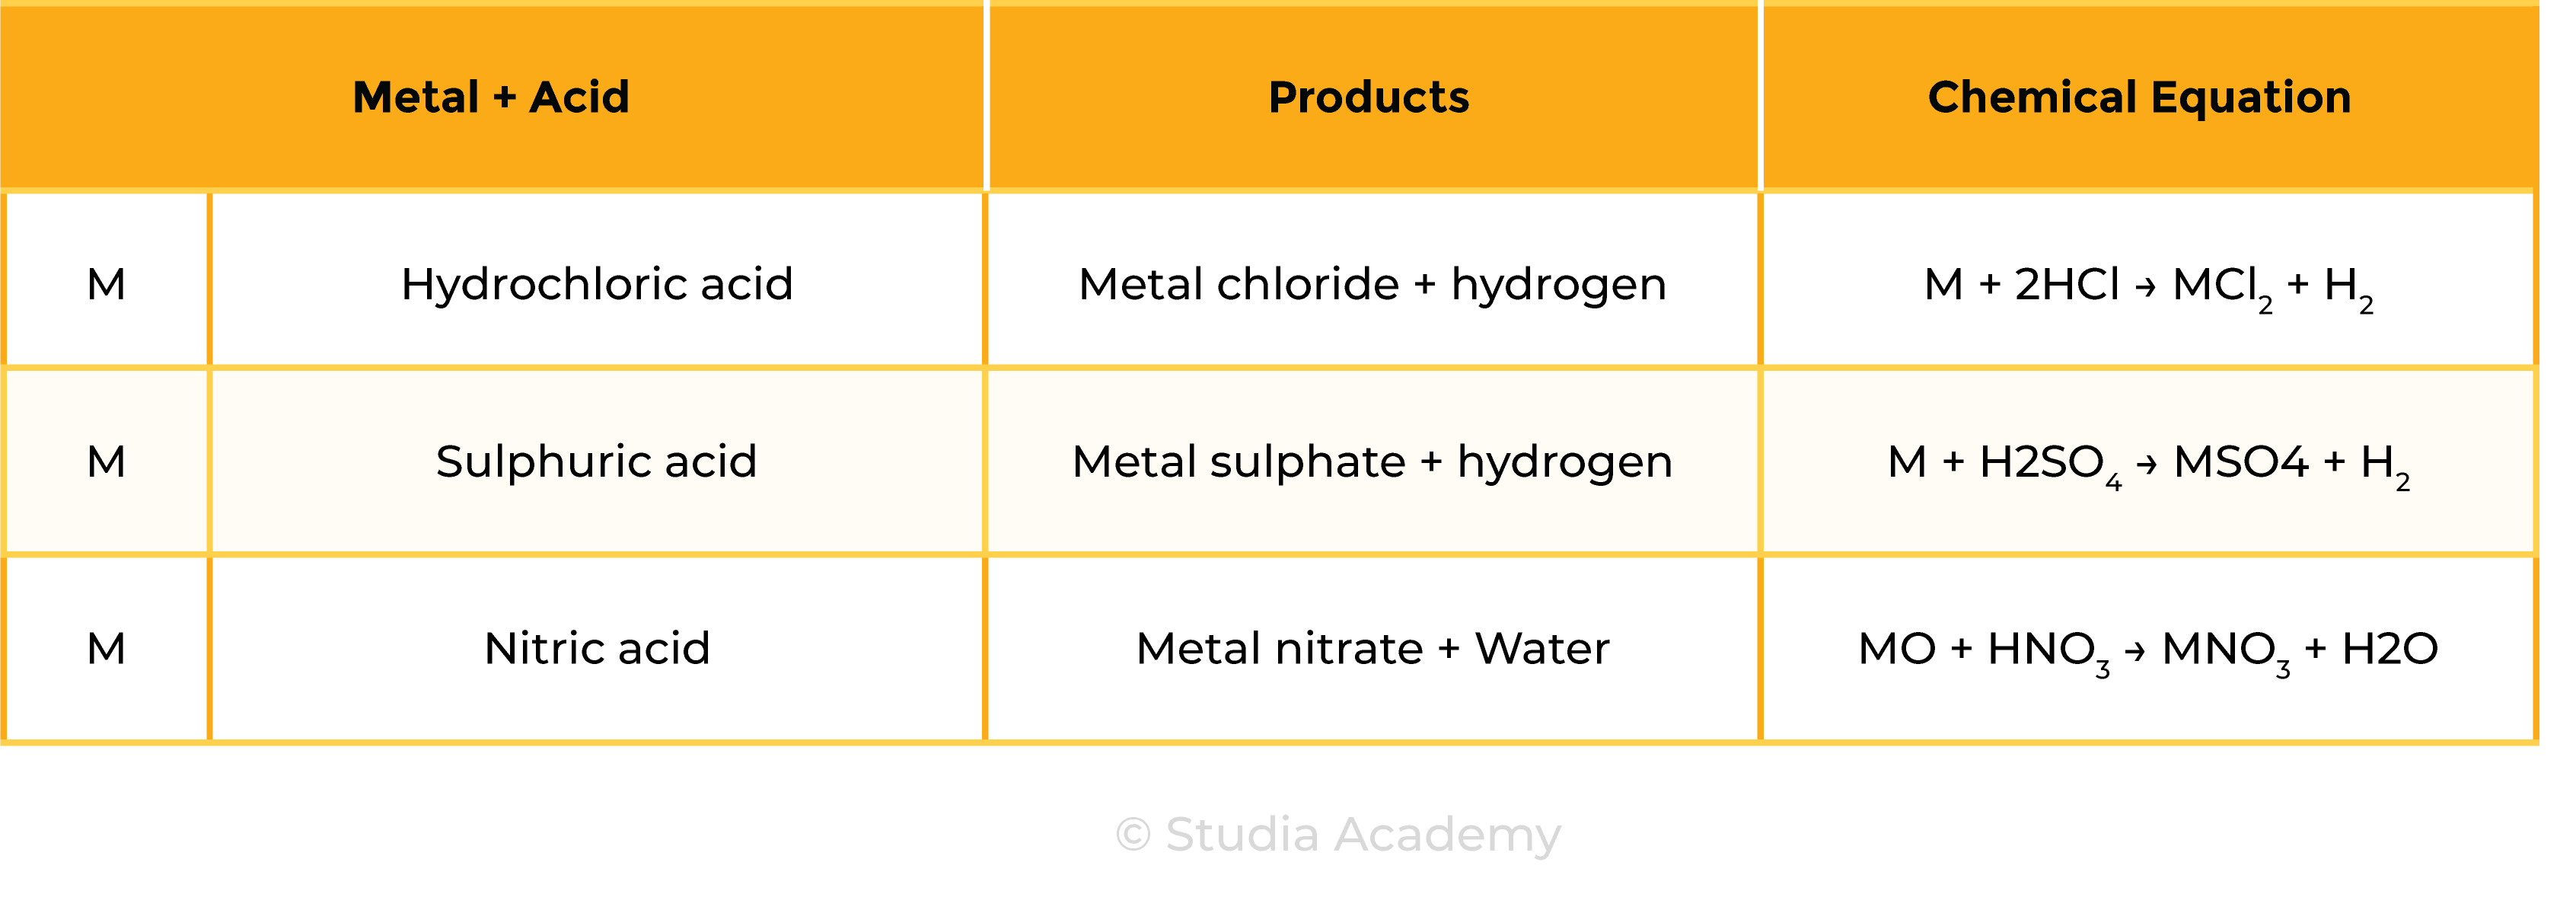 edexcel_igcse_chemistry_topic 16 tables_acids, bases, and salt preparations_002_metal and acid reactions